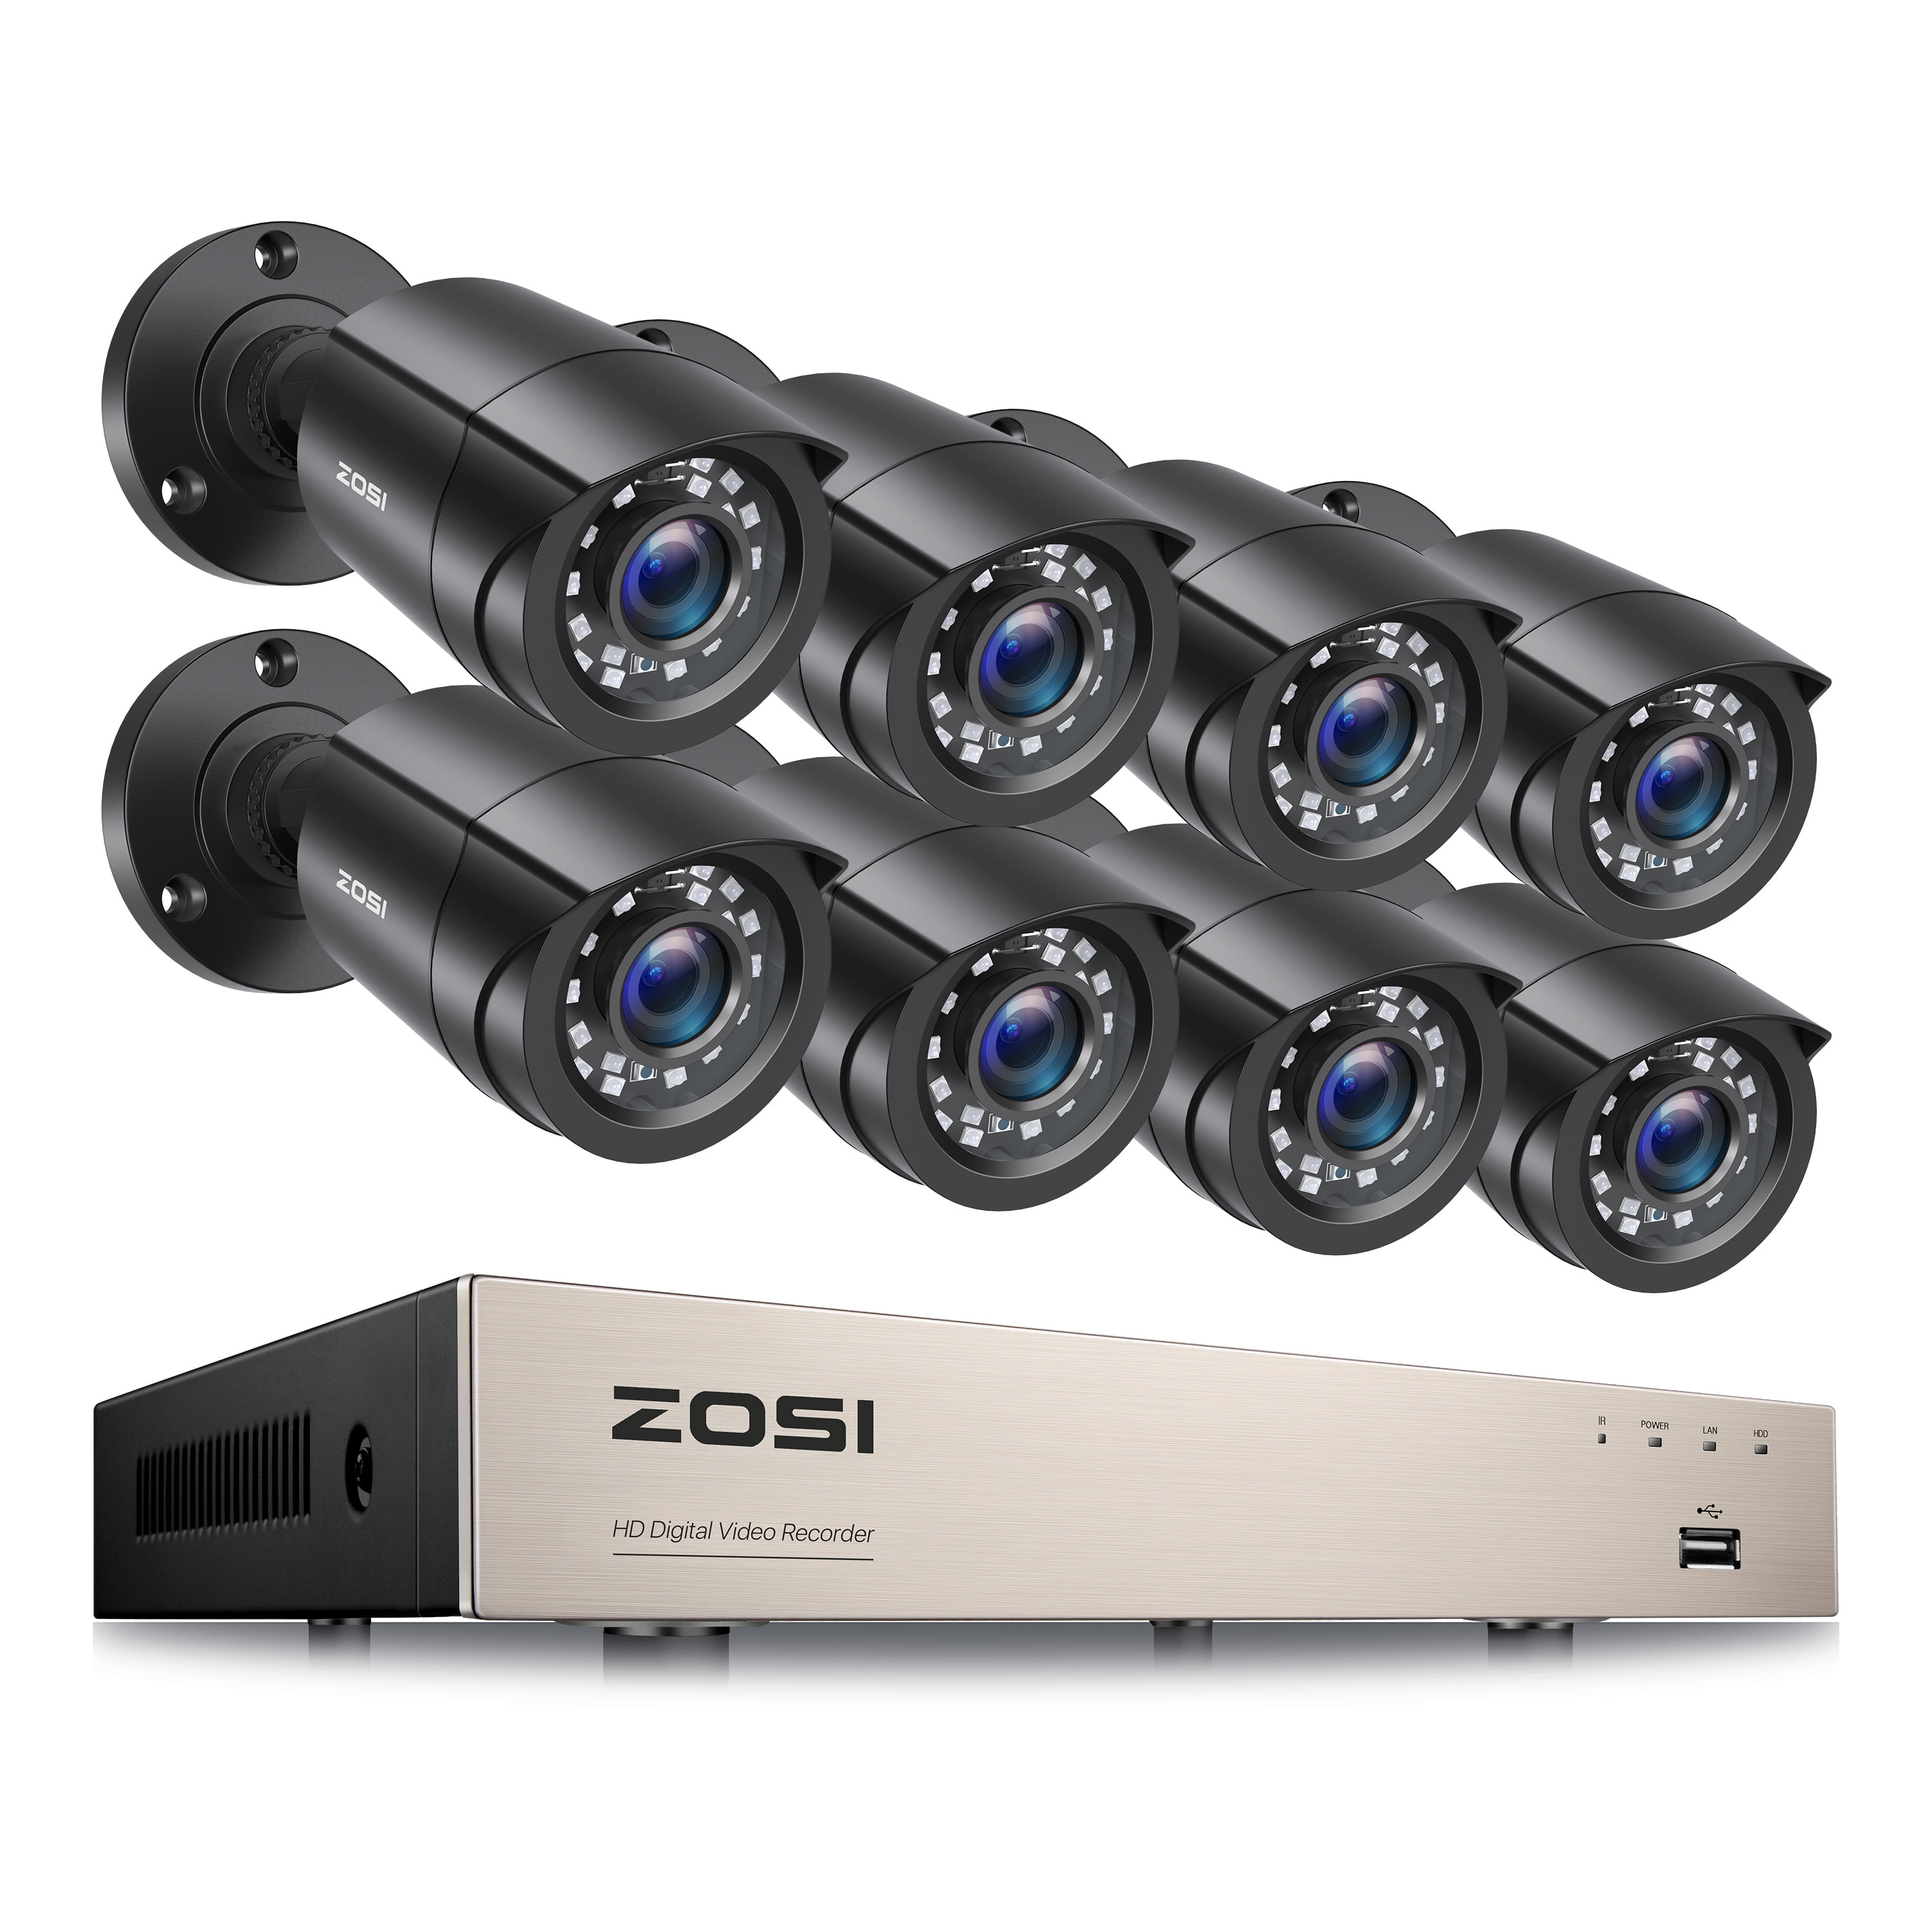 ZOSI H.265+1080p Home Security Camera System,8 Channel 5MP Lite Surveillance DVR with Hard Drive 1TB and 4 x 1080p Weatherproof CCTV Bullet Camera Outdoor Indoor with 80ft Night Vision Motion Alerts 